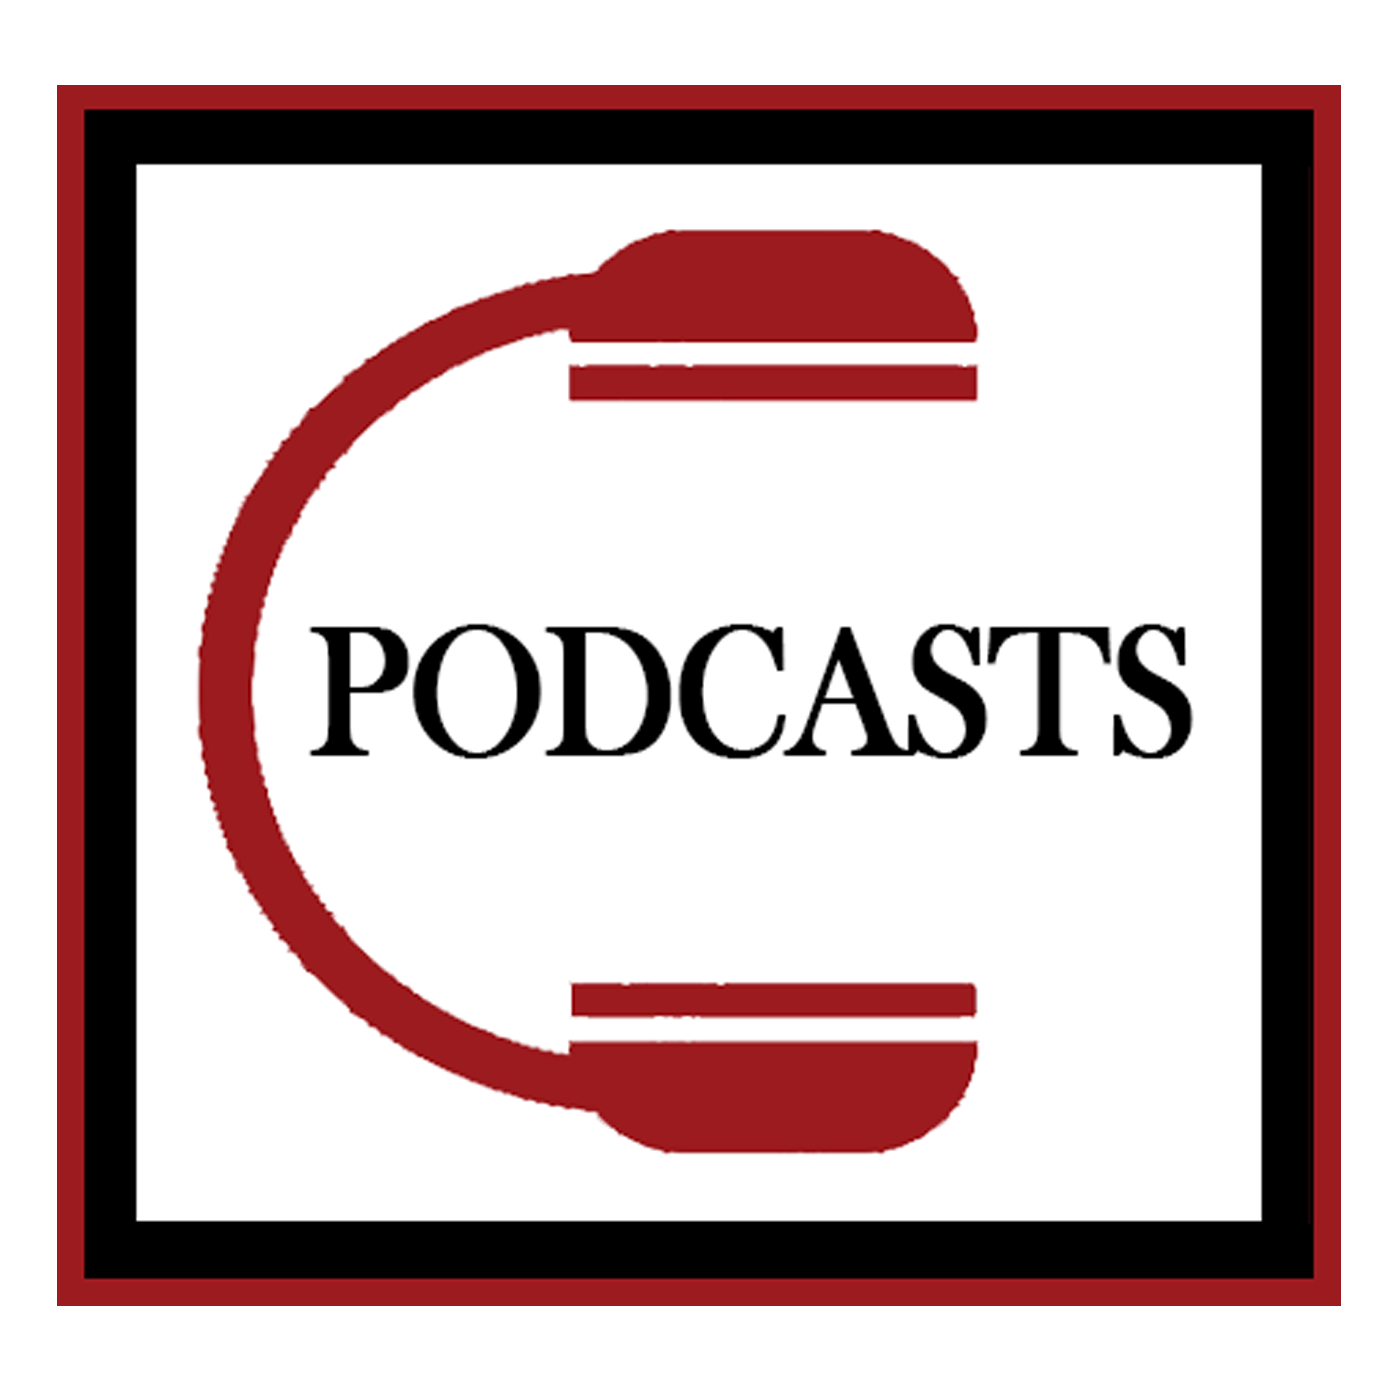 Chronicle Podcast Network